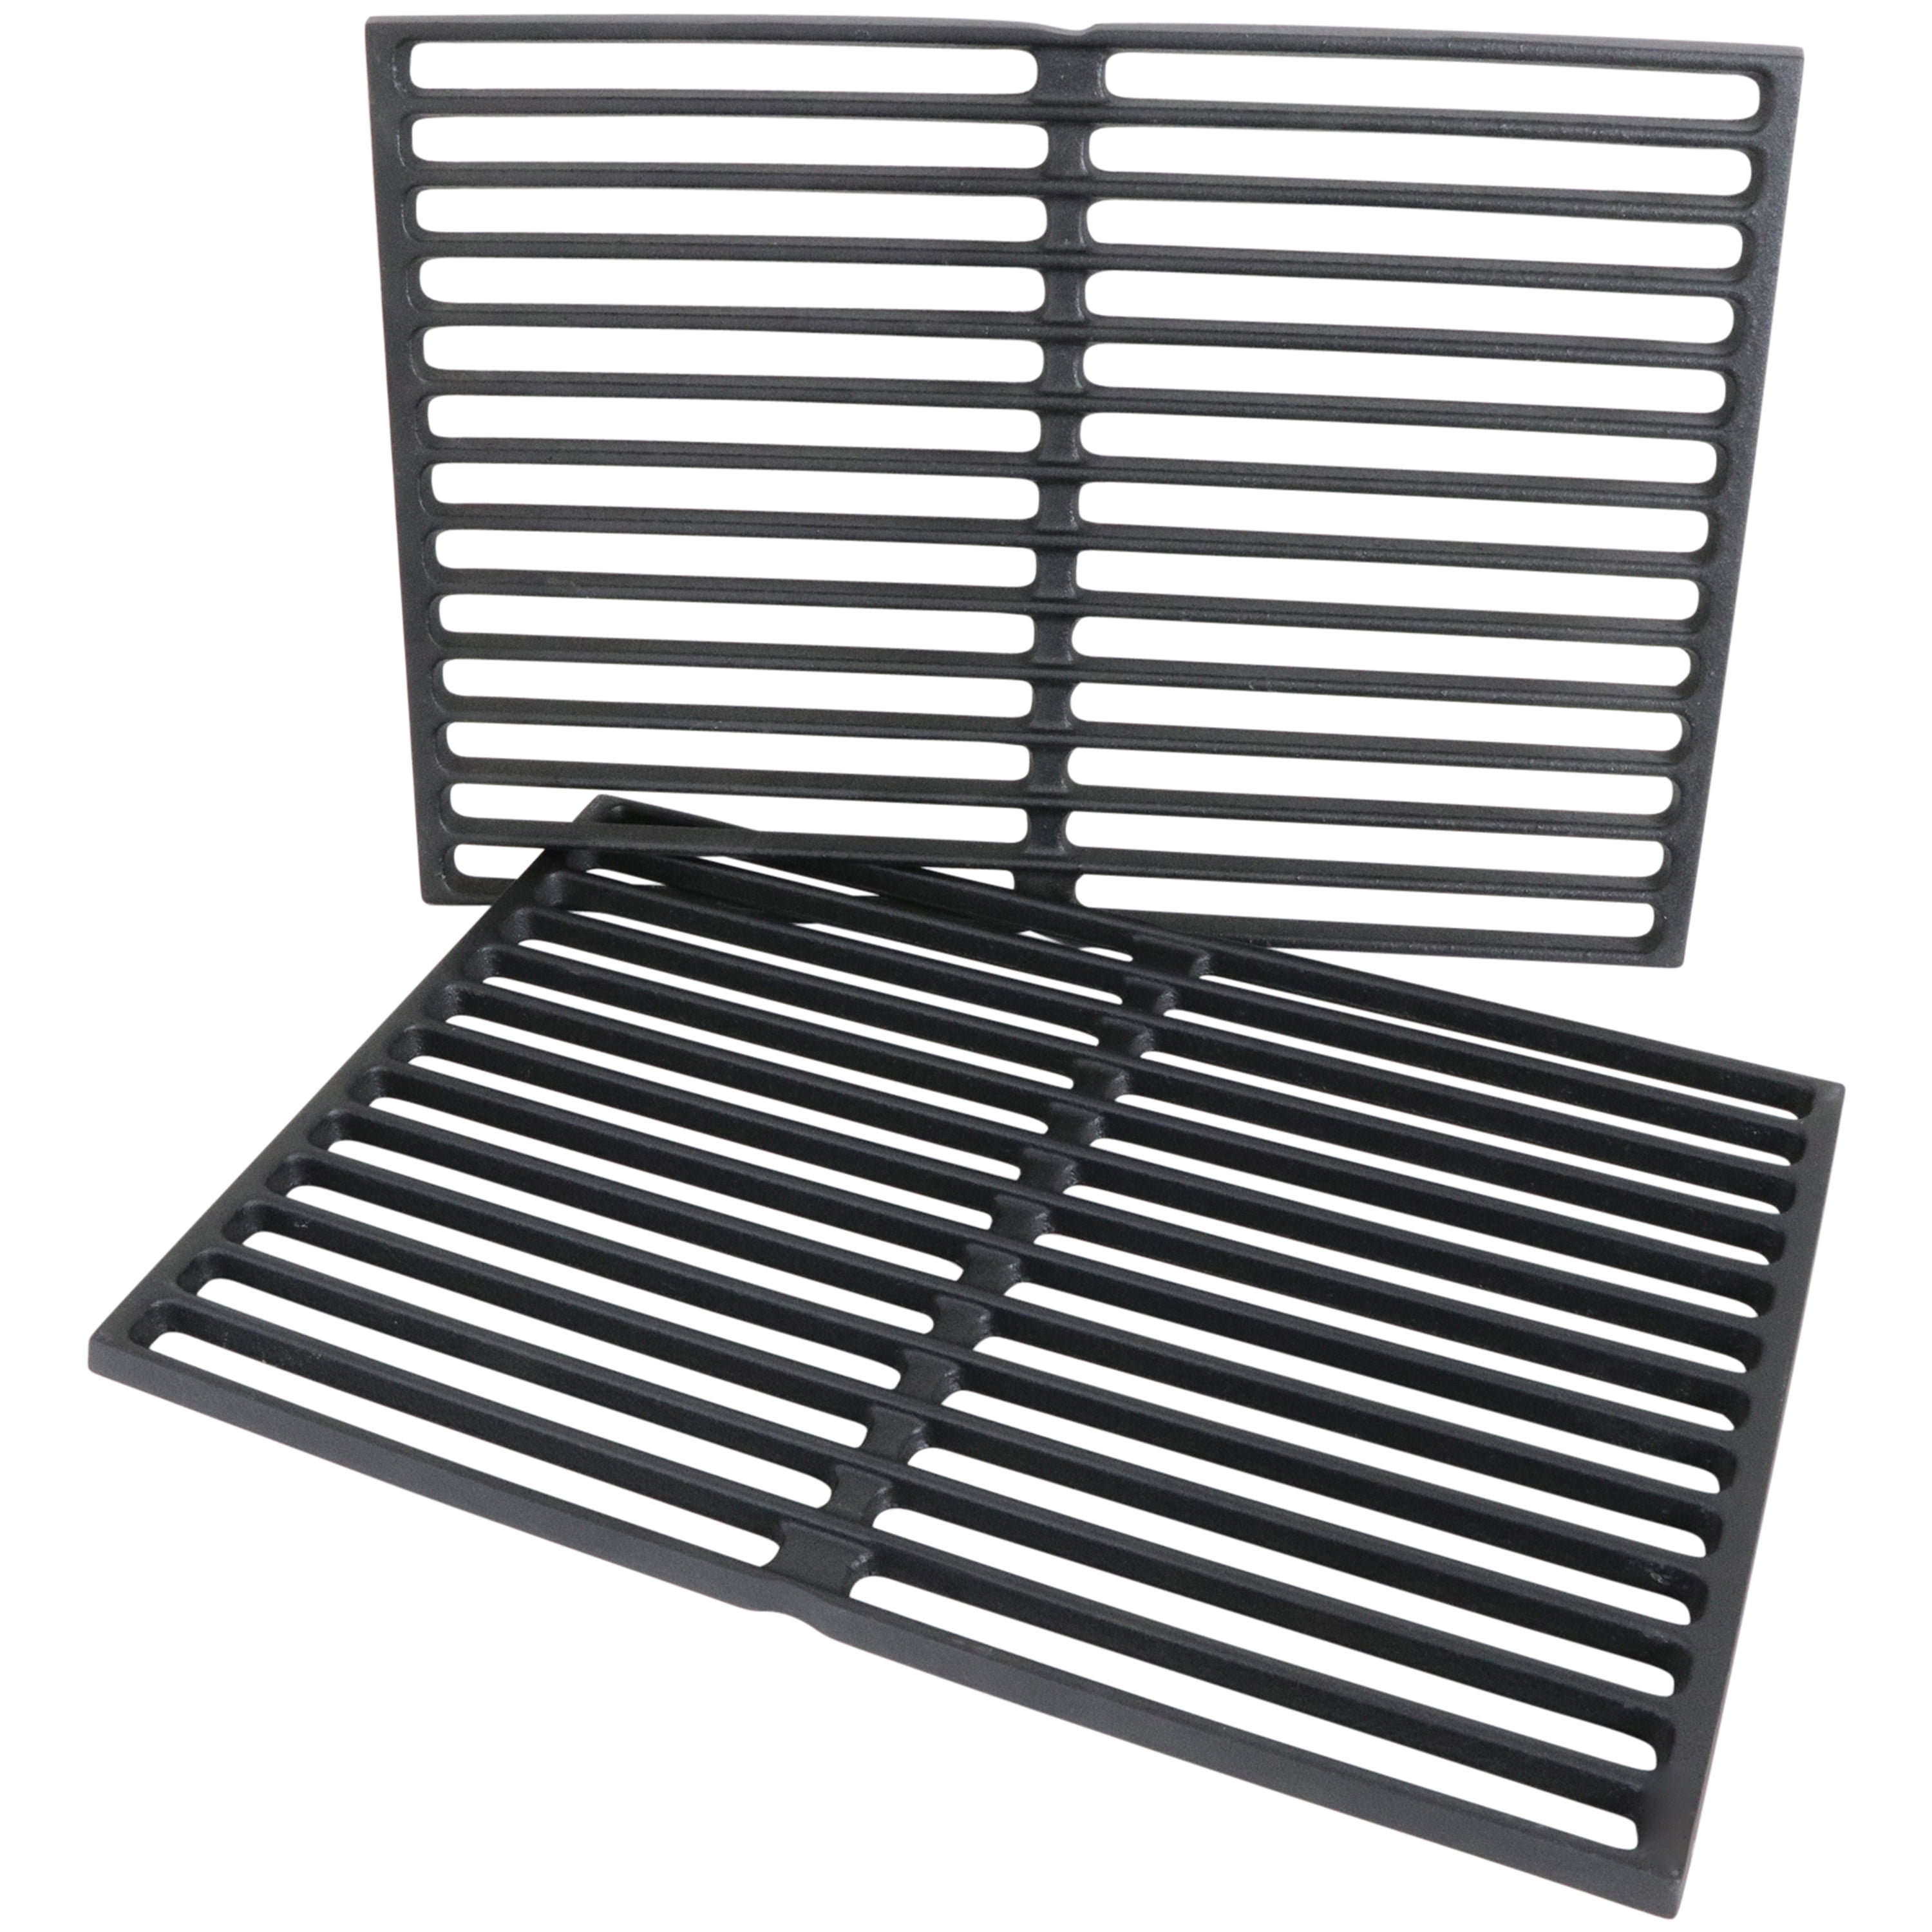 Cooking Grates Porcelain Enameled 2 Pack Gas Grill Replacement Parts for Weber 